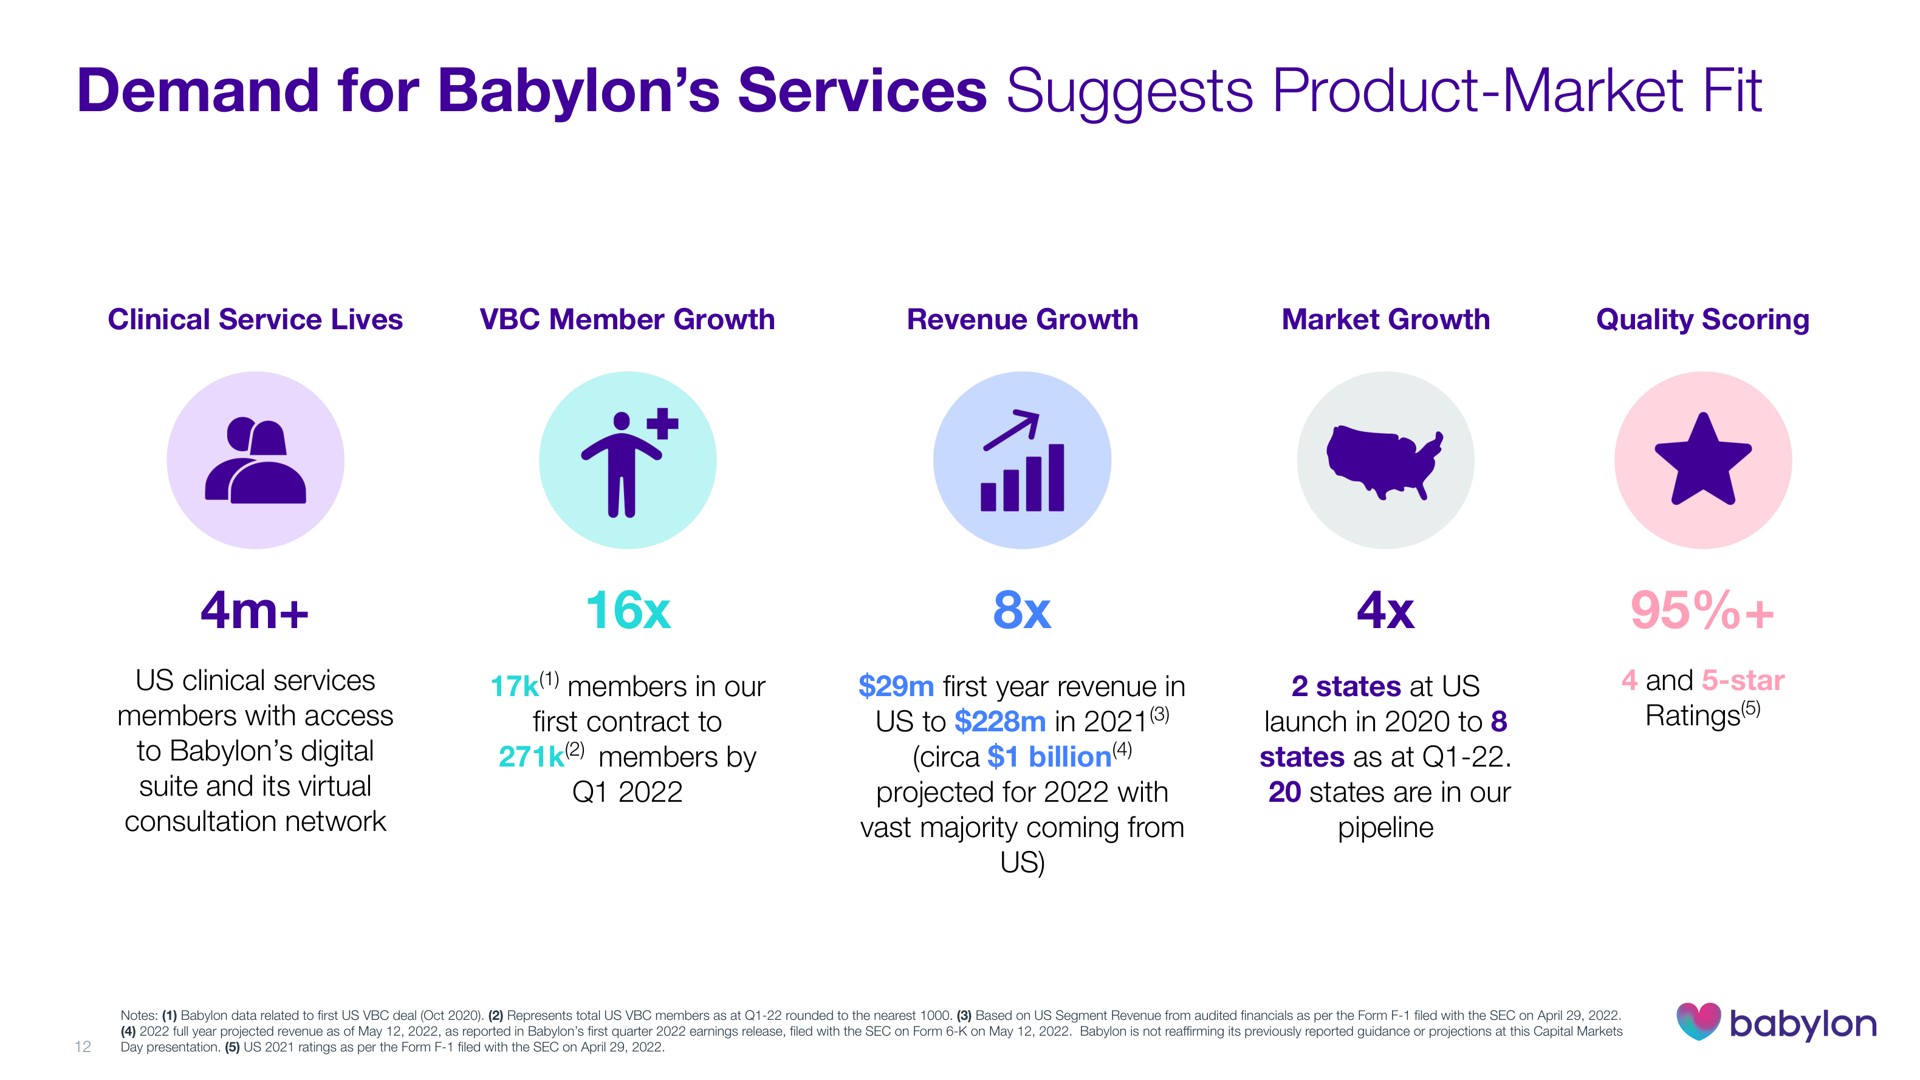 demand for services suggests product market fit a go | Babylon